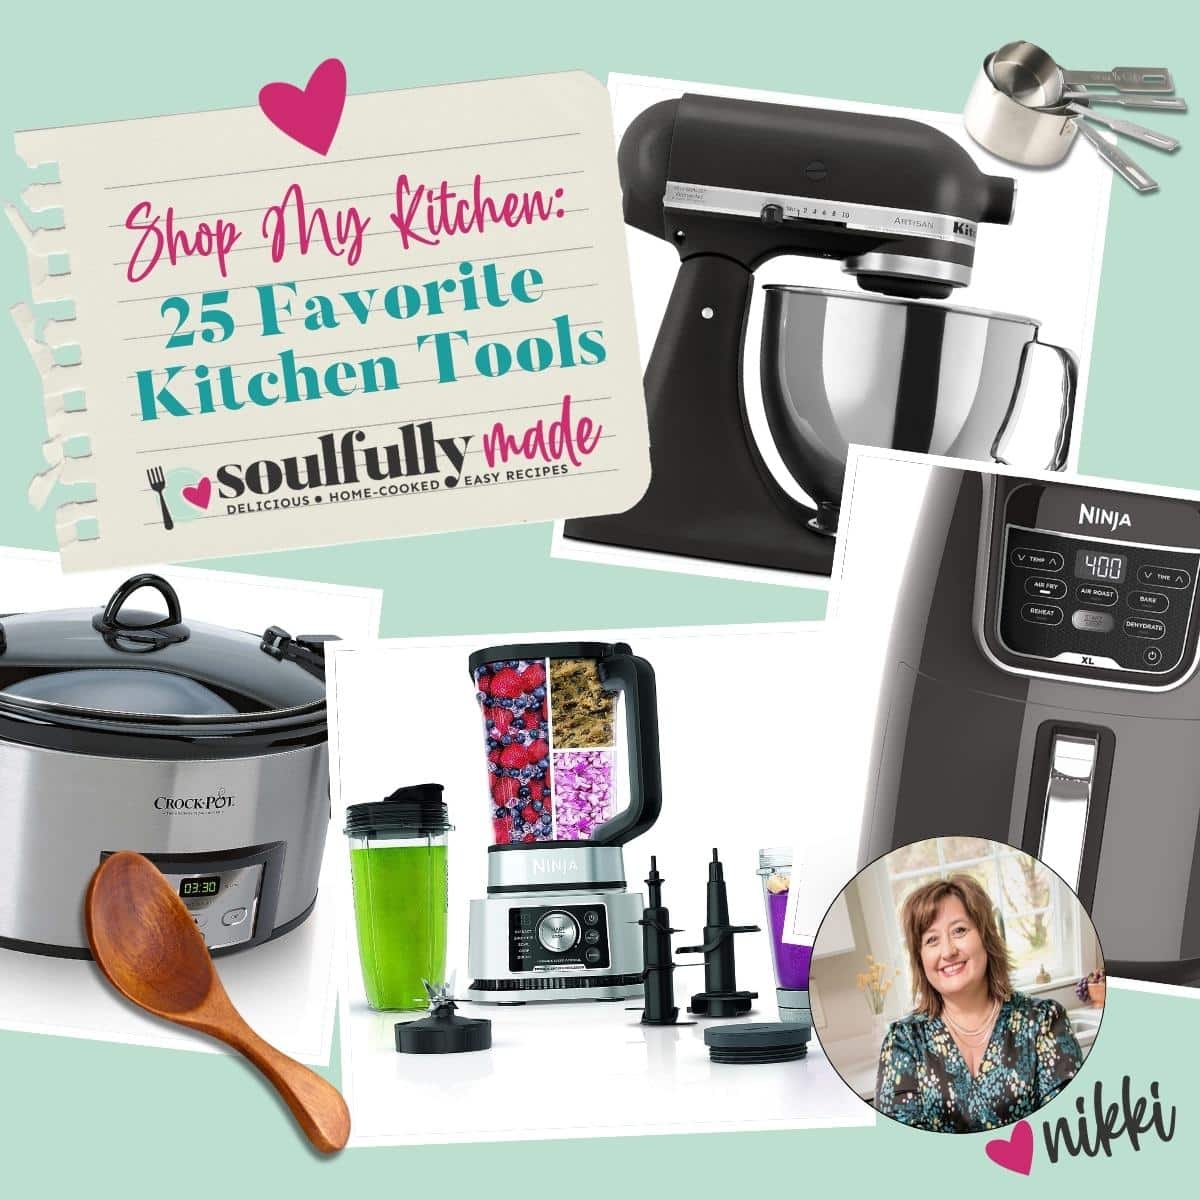 Home and Kitchen Accessories